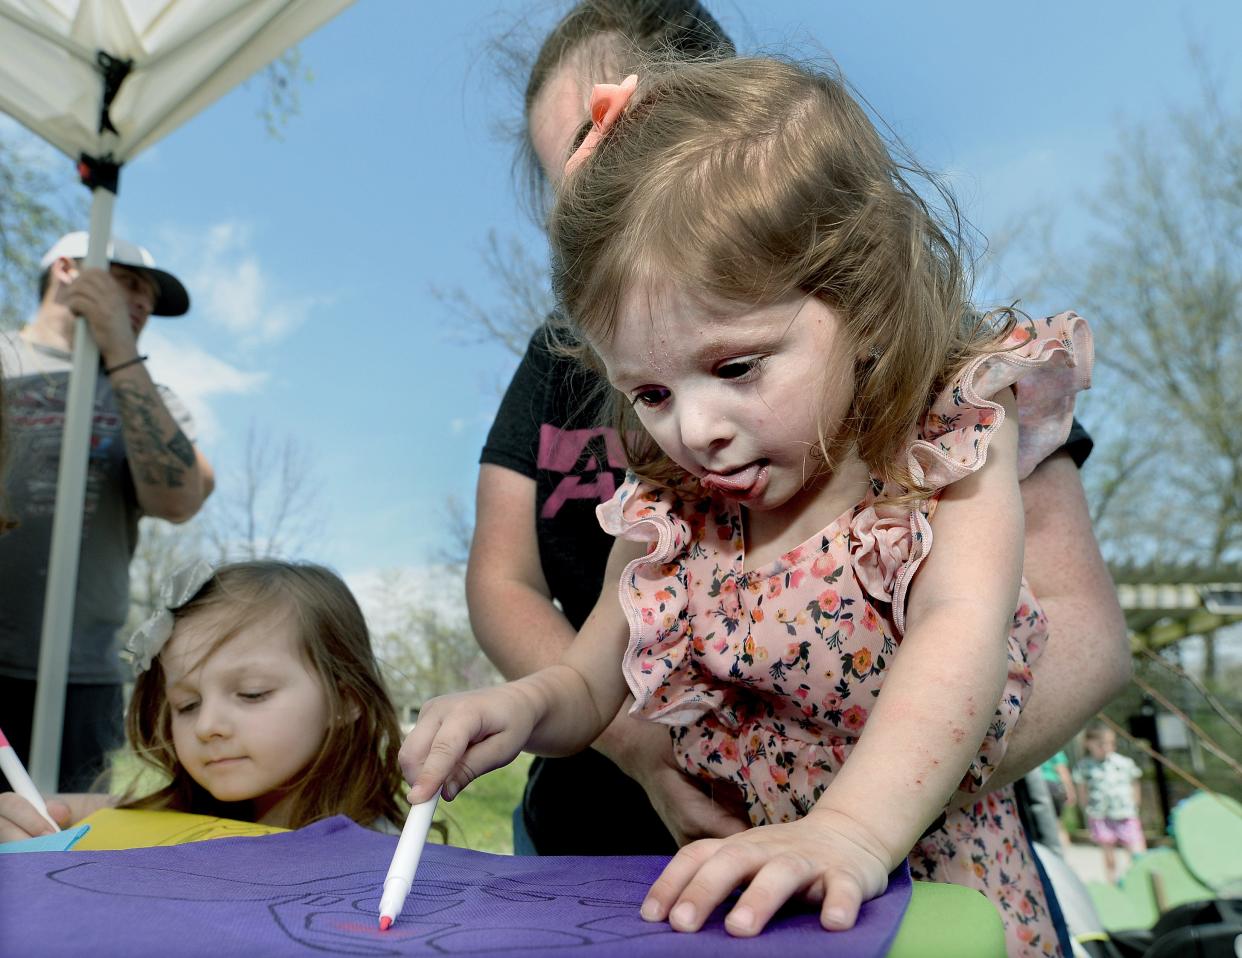 Wrigley Mahler, 2, of Springfield colors a turtle image onto a reusable tote bag during an Earth Awareness Fair at the Henson Robinson Zoo in Springfield Saturday April 23, 2022. [Thomas J. Turney/ The State Journal-Register]